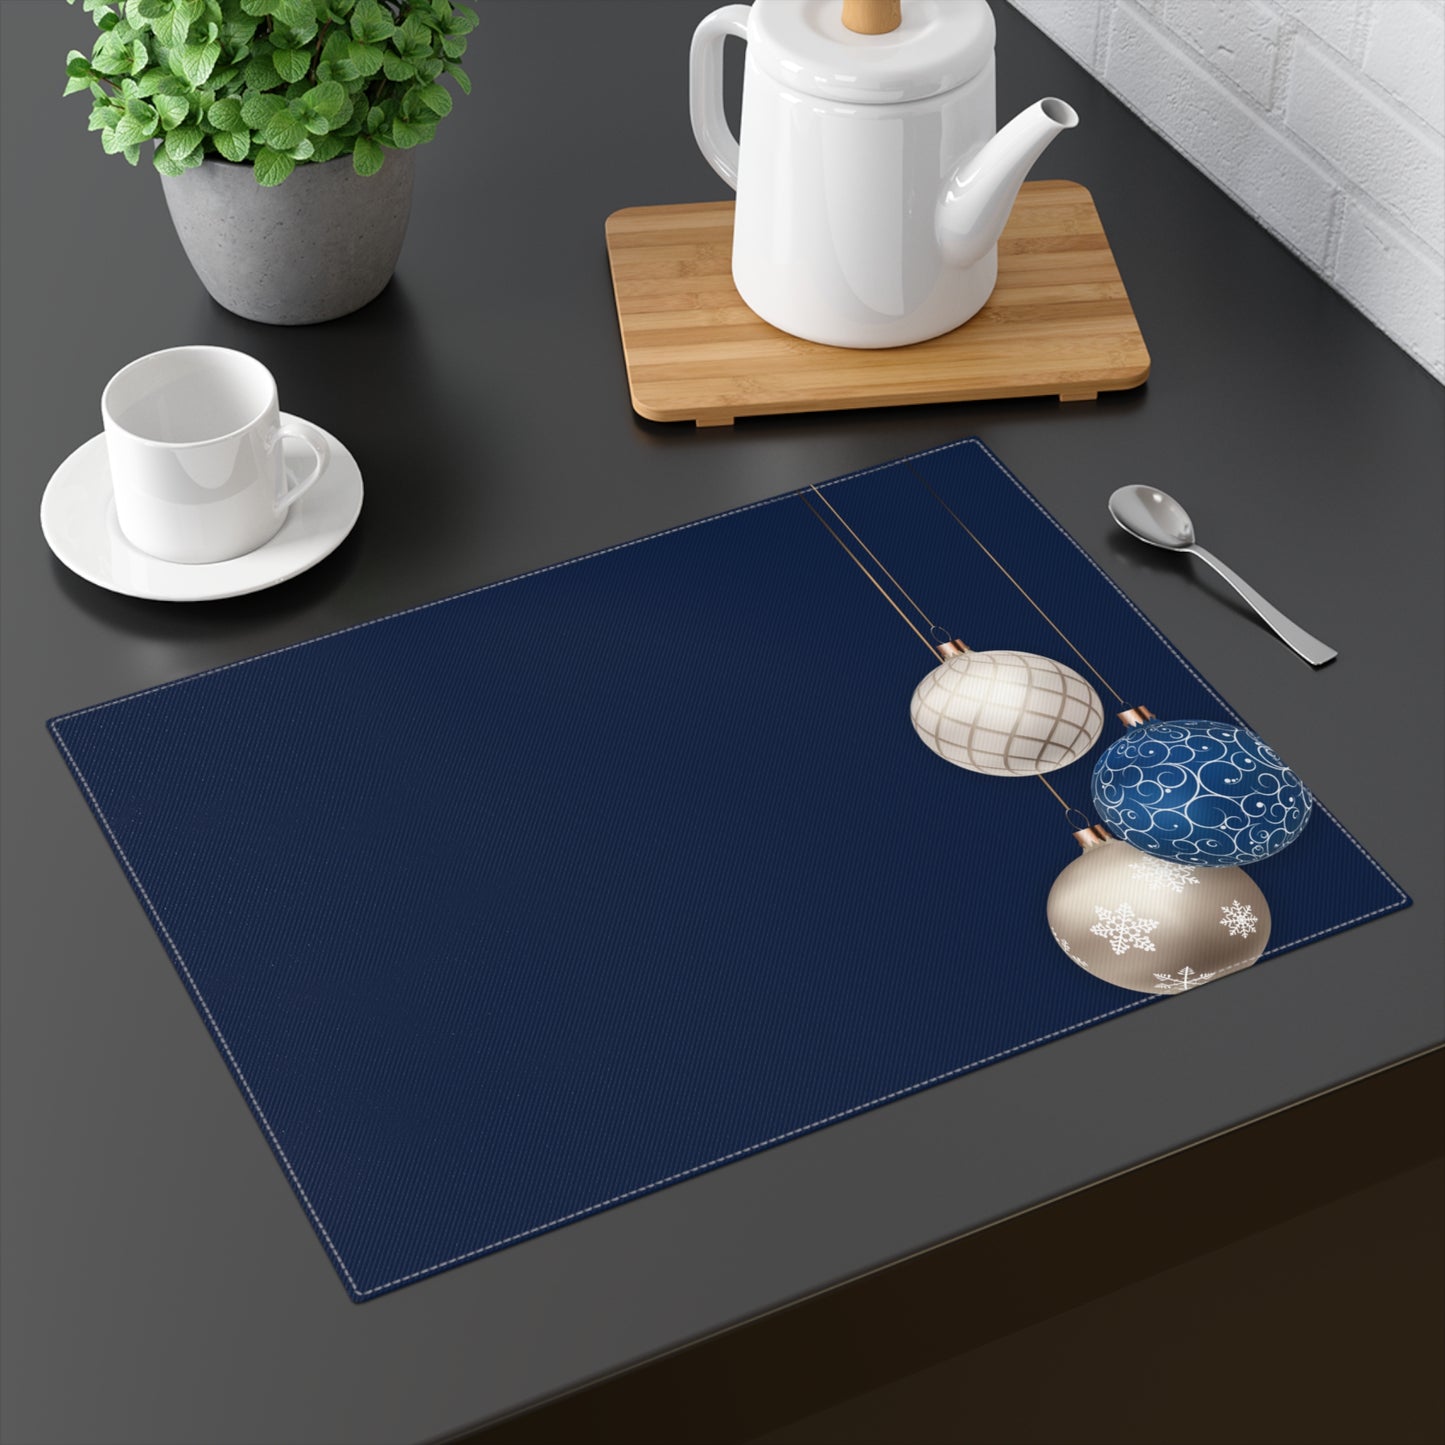 Blue and Silver Balls Christmas Placemat, 1pc